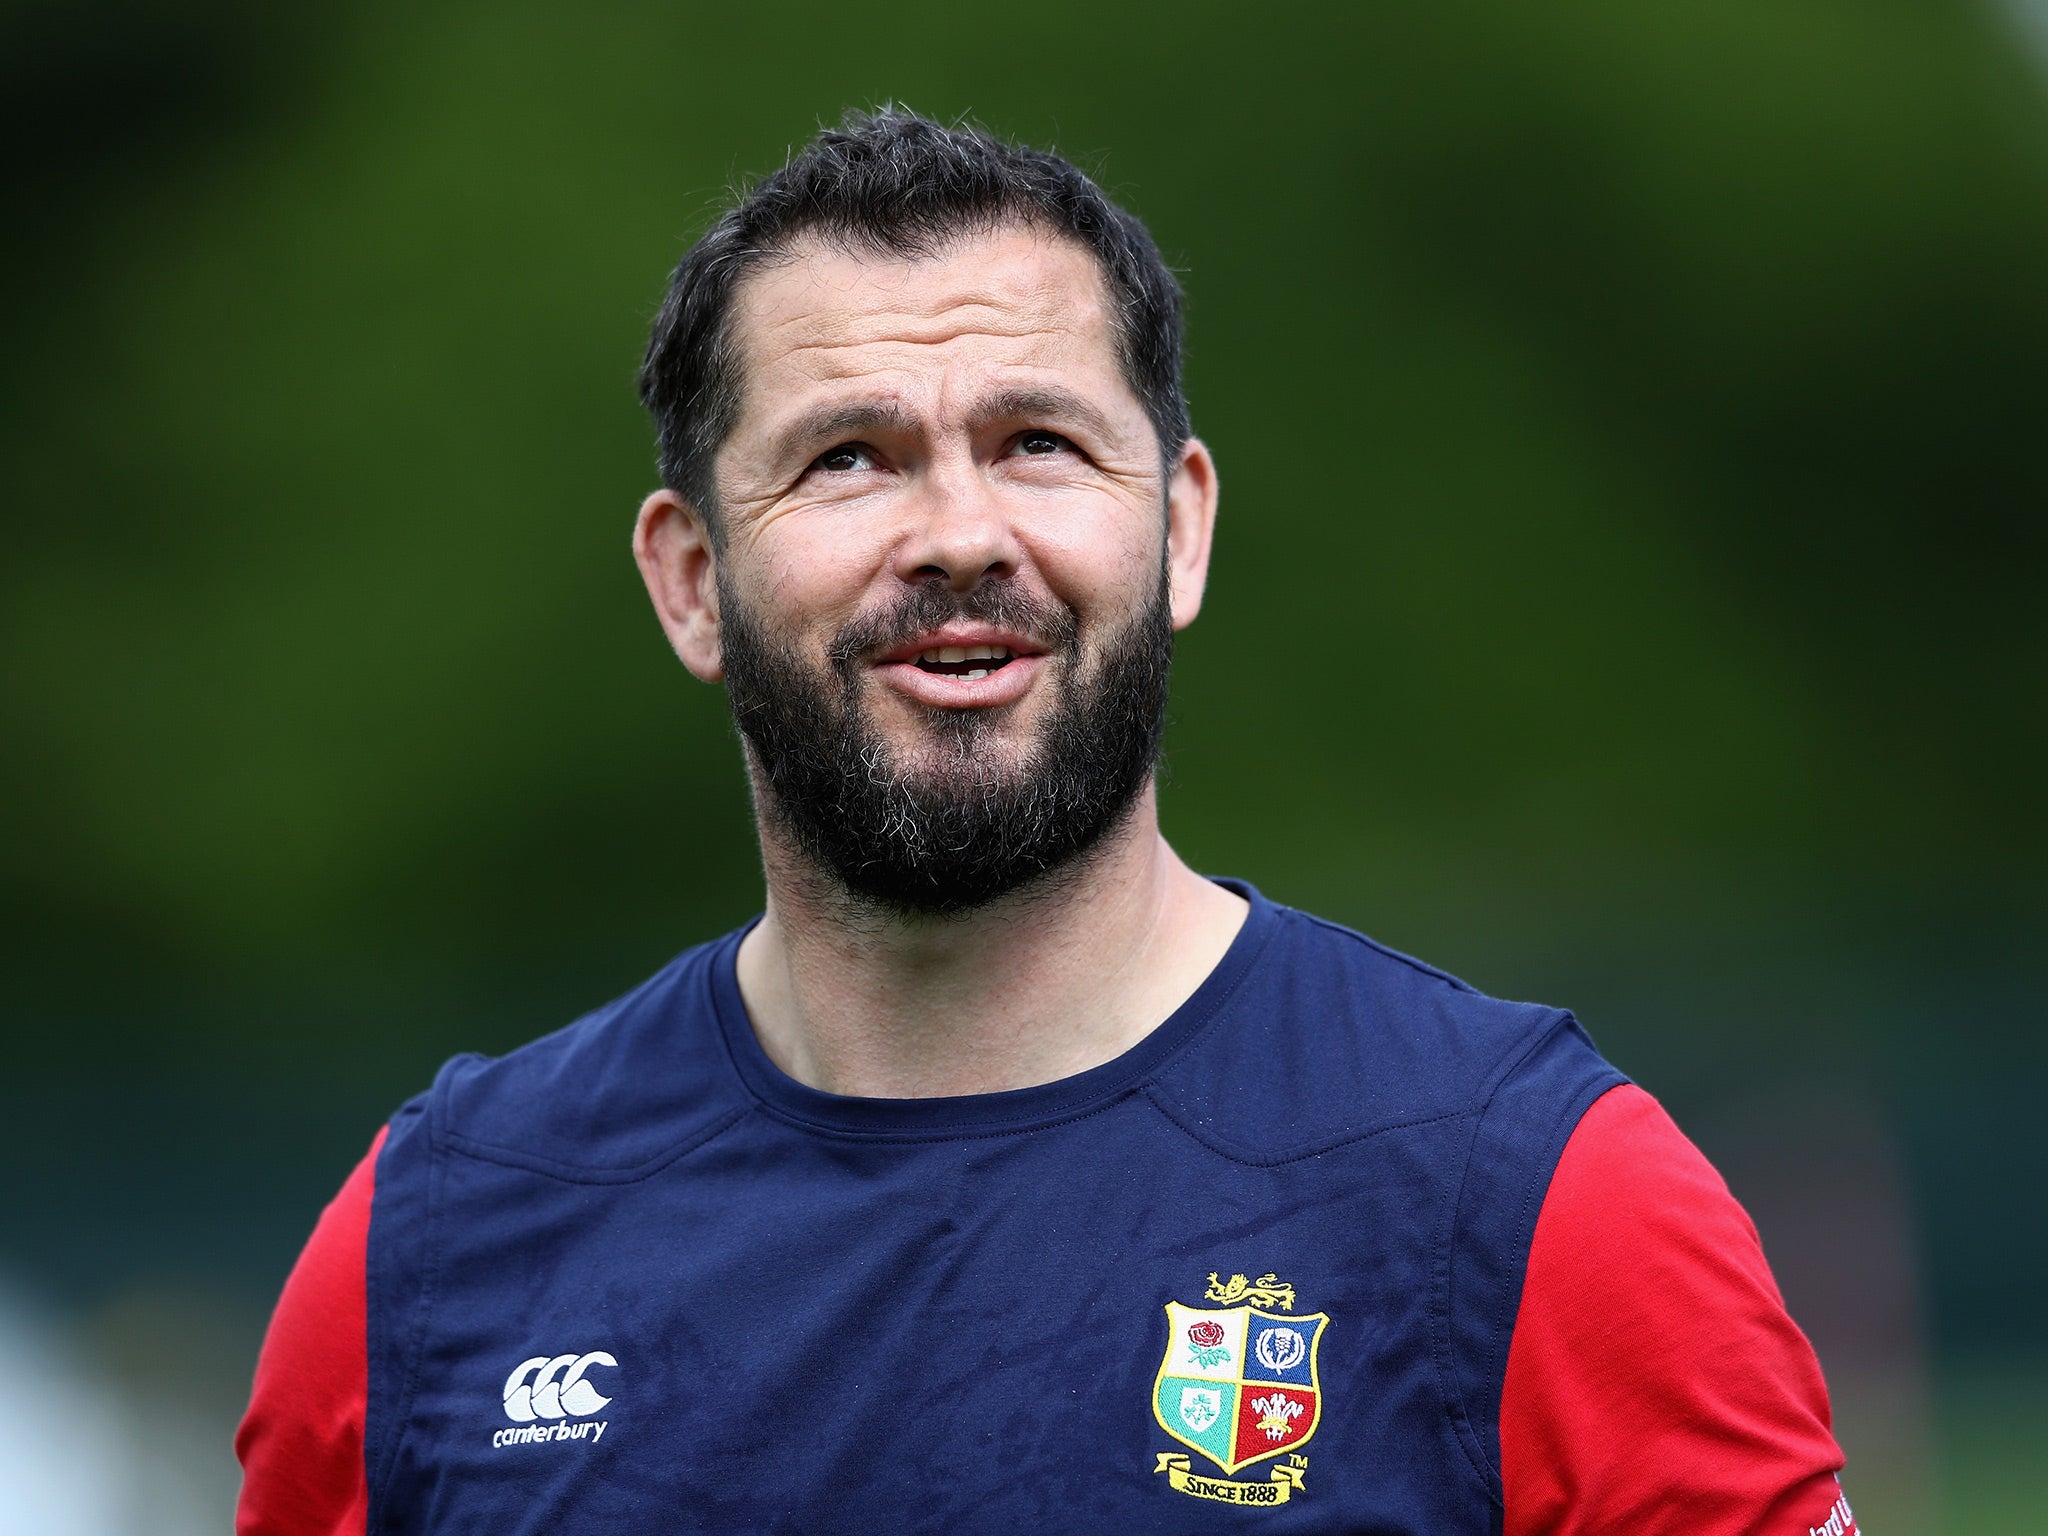 Andy Farrell knows the Lions will be put under the kosh in the three Tests